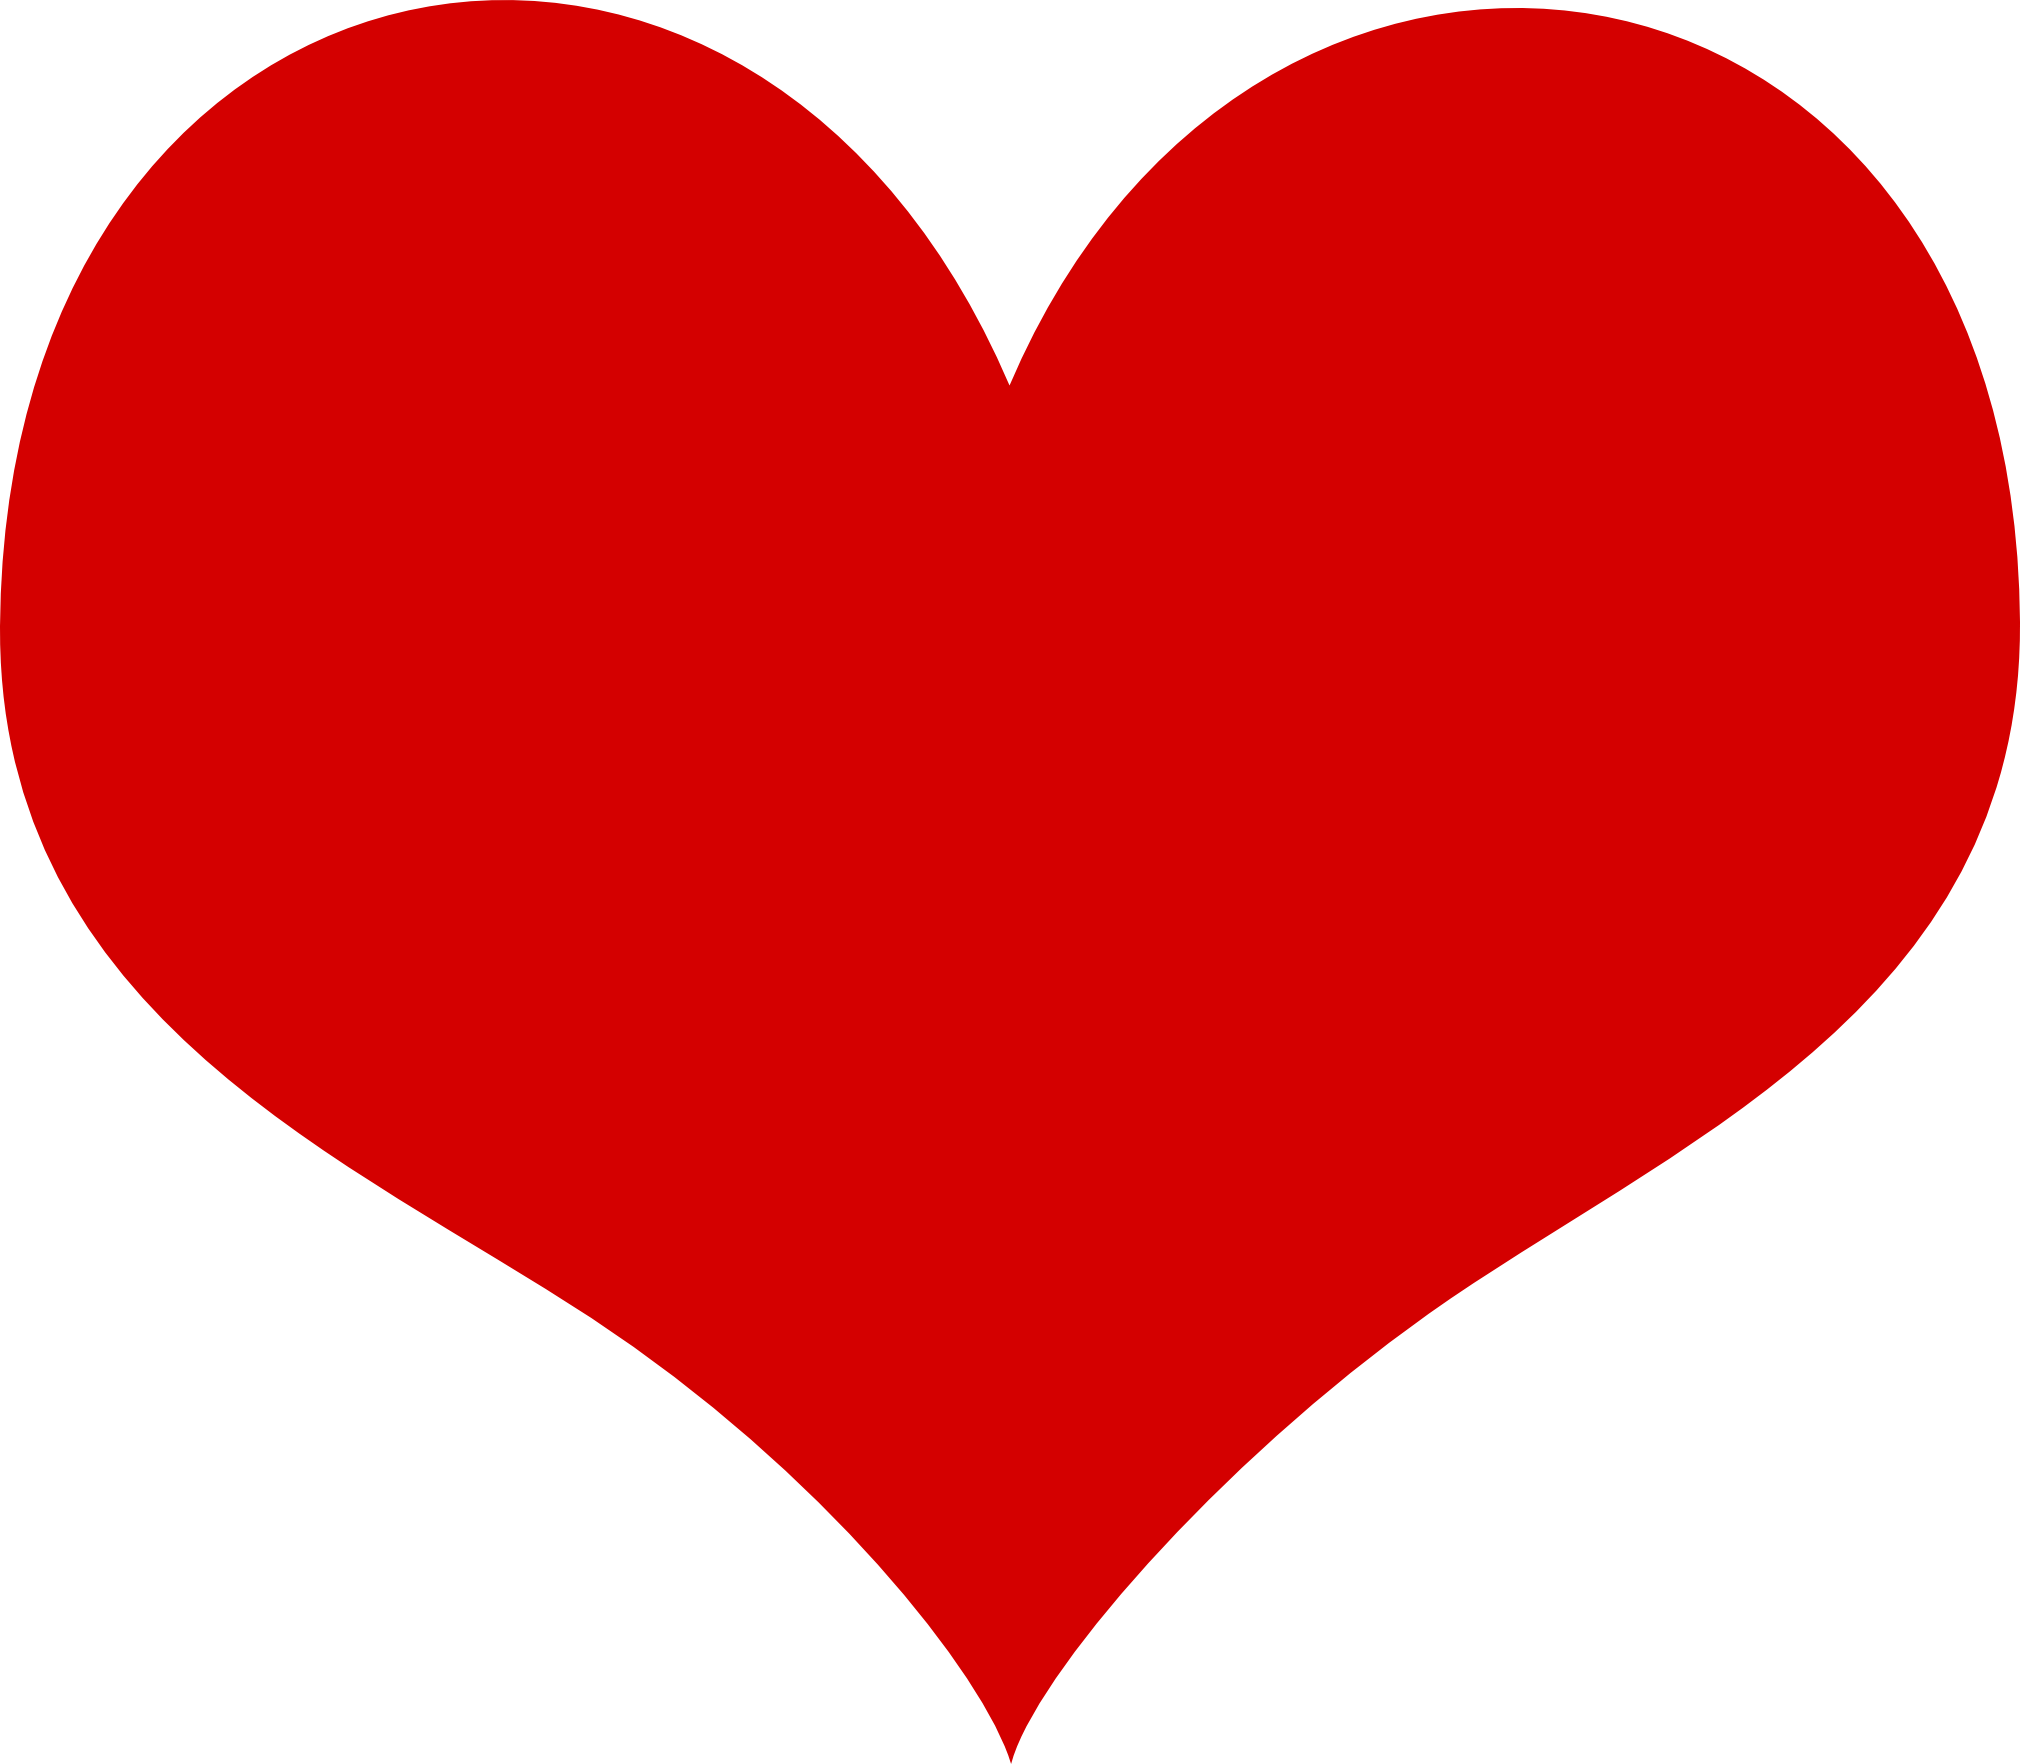 Clipart heart man. Hearts free images 